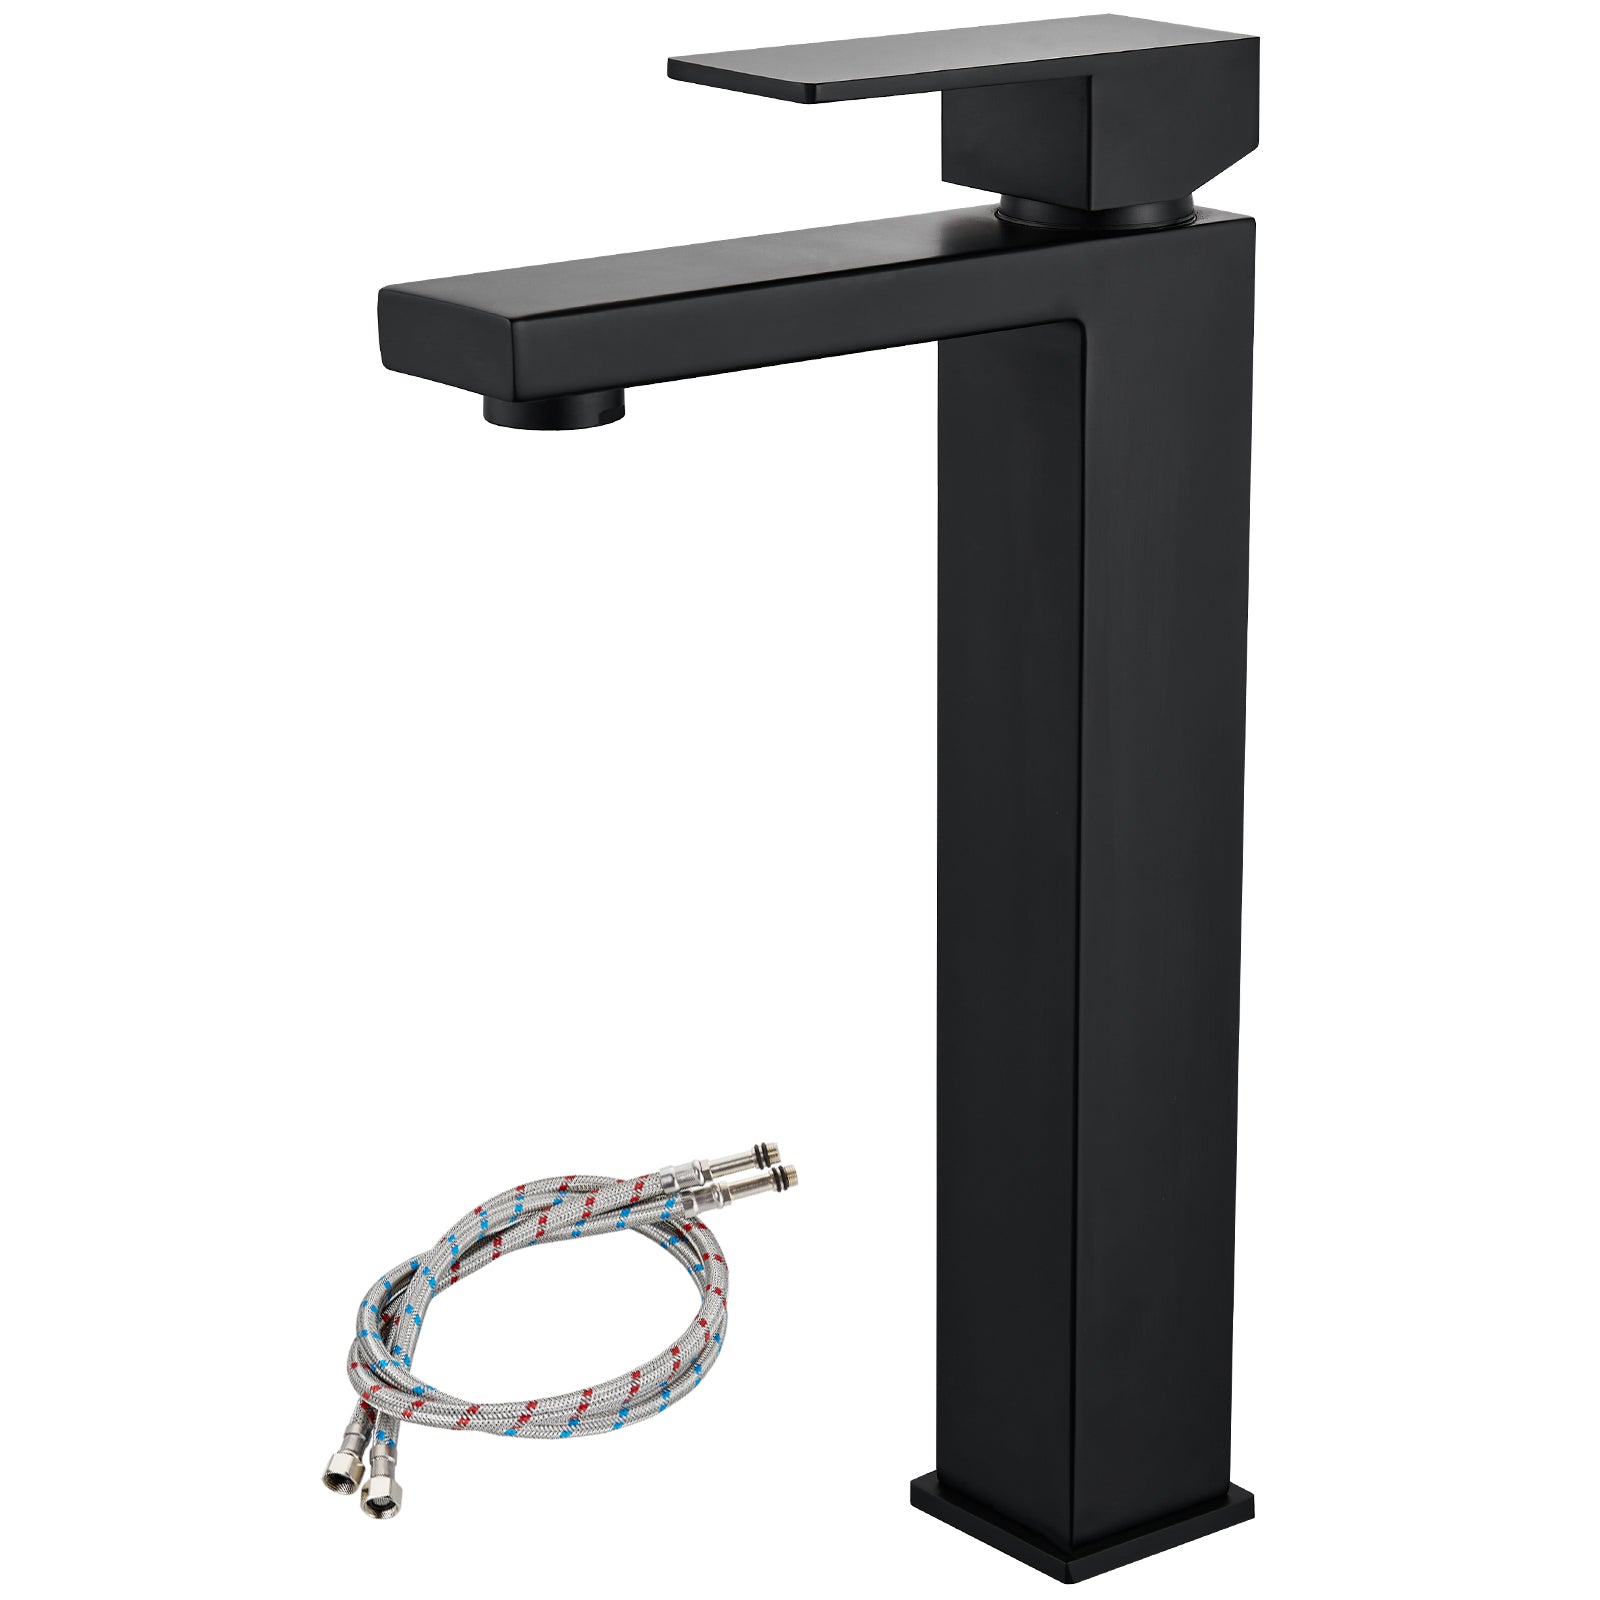 Black Bathroom Vessel Sink Faucet Single Handle Basin Bowl Tap SUS304 Stainless Steel Tall Body 1 Hole Lavatory Vanity Mixer Bar Tap Tall Spout Deck Mount